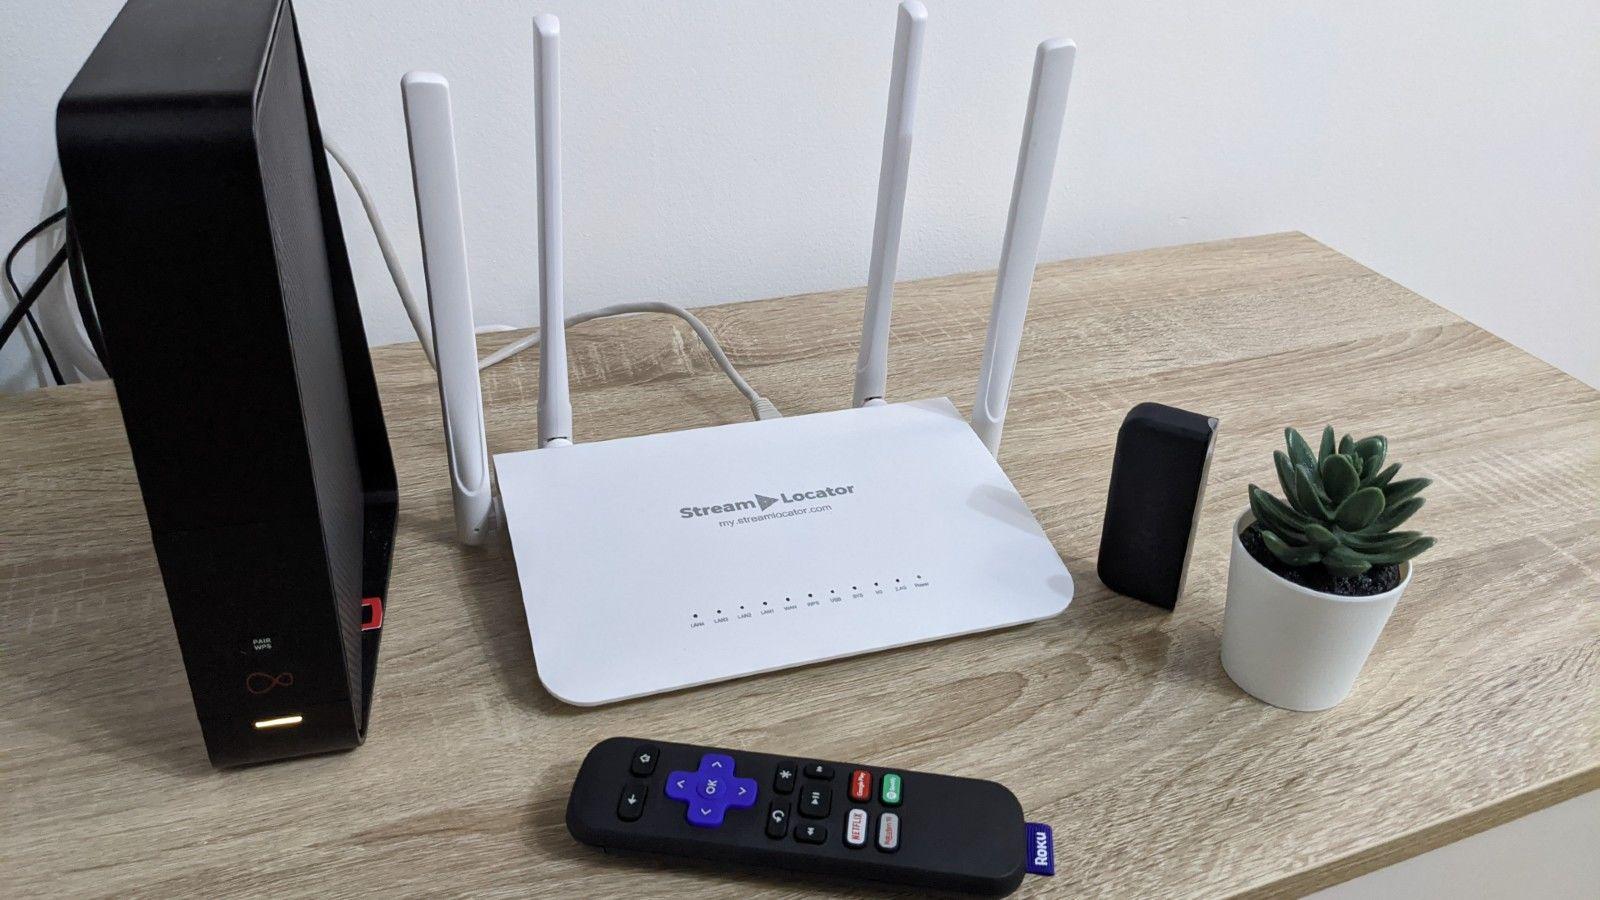 best wireless router for streaming netflix in hd to tv